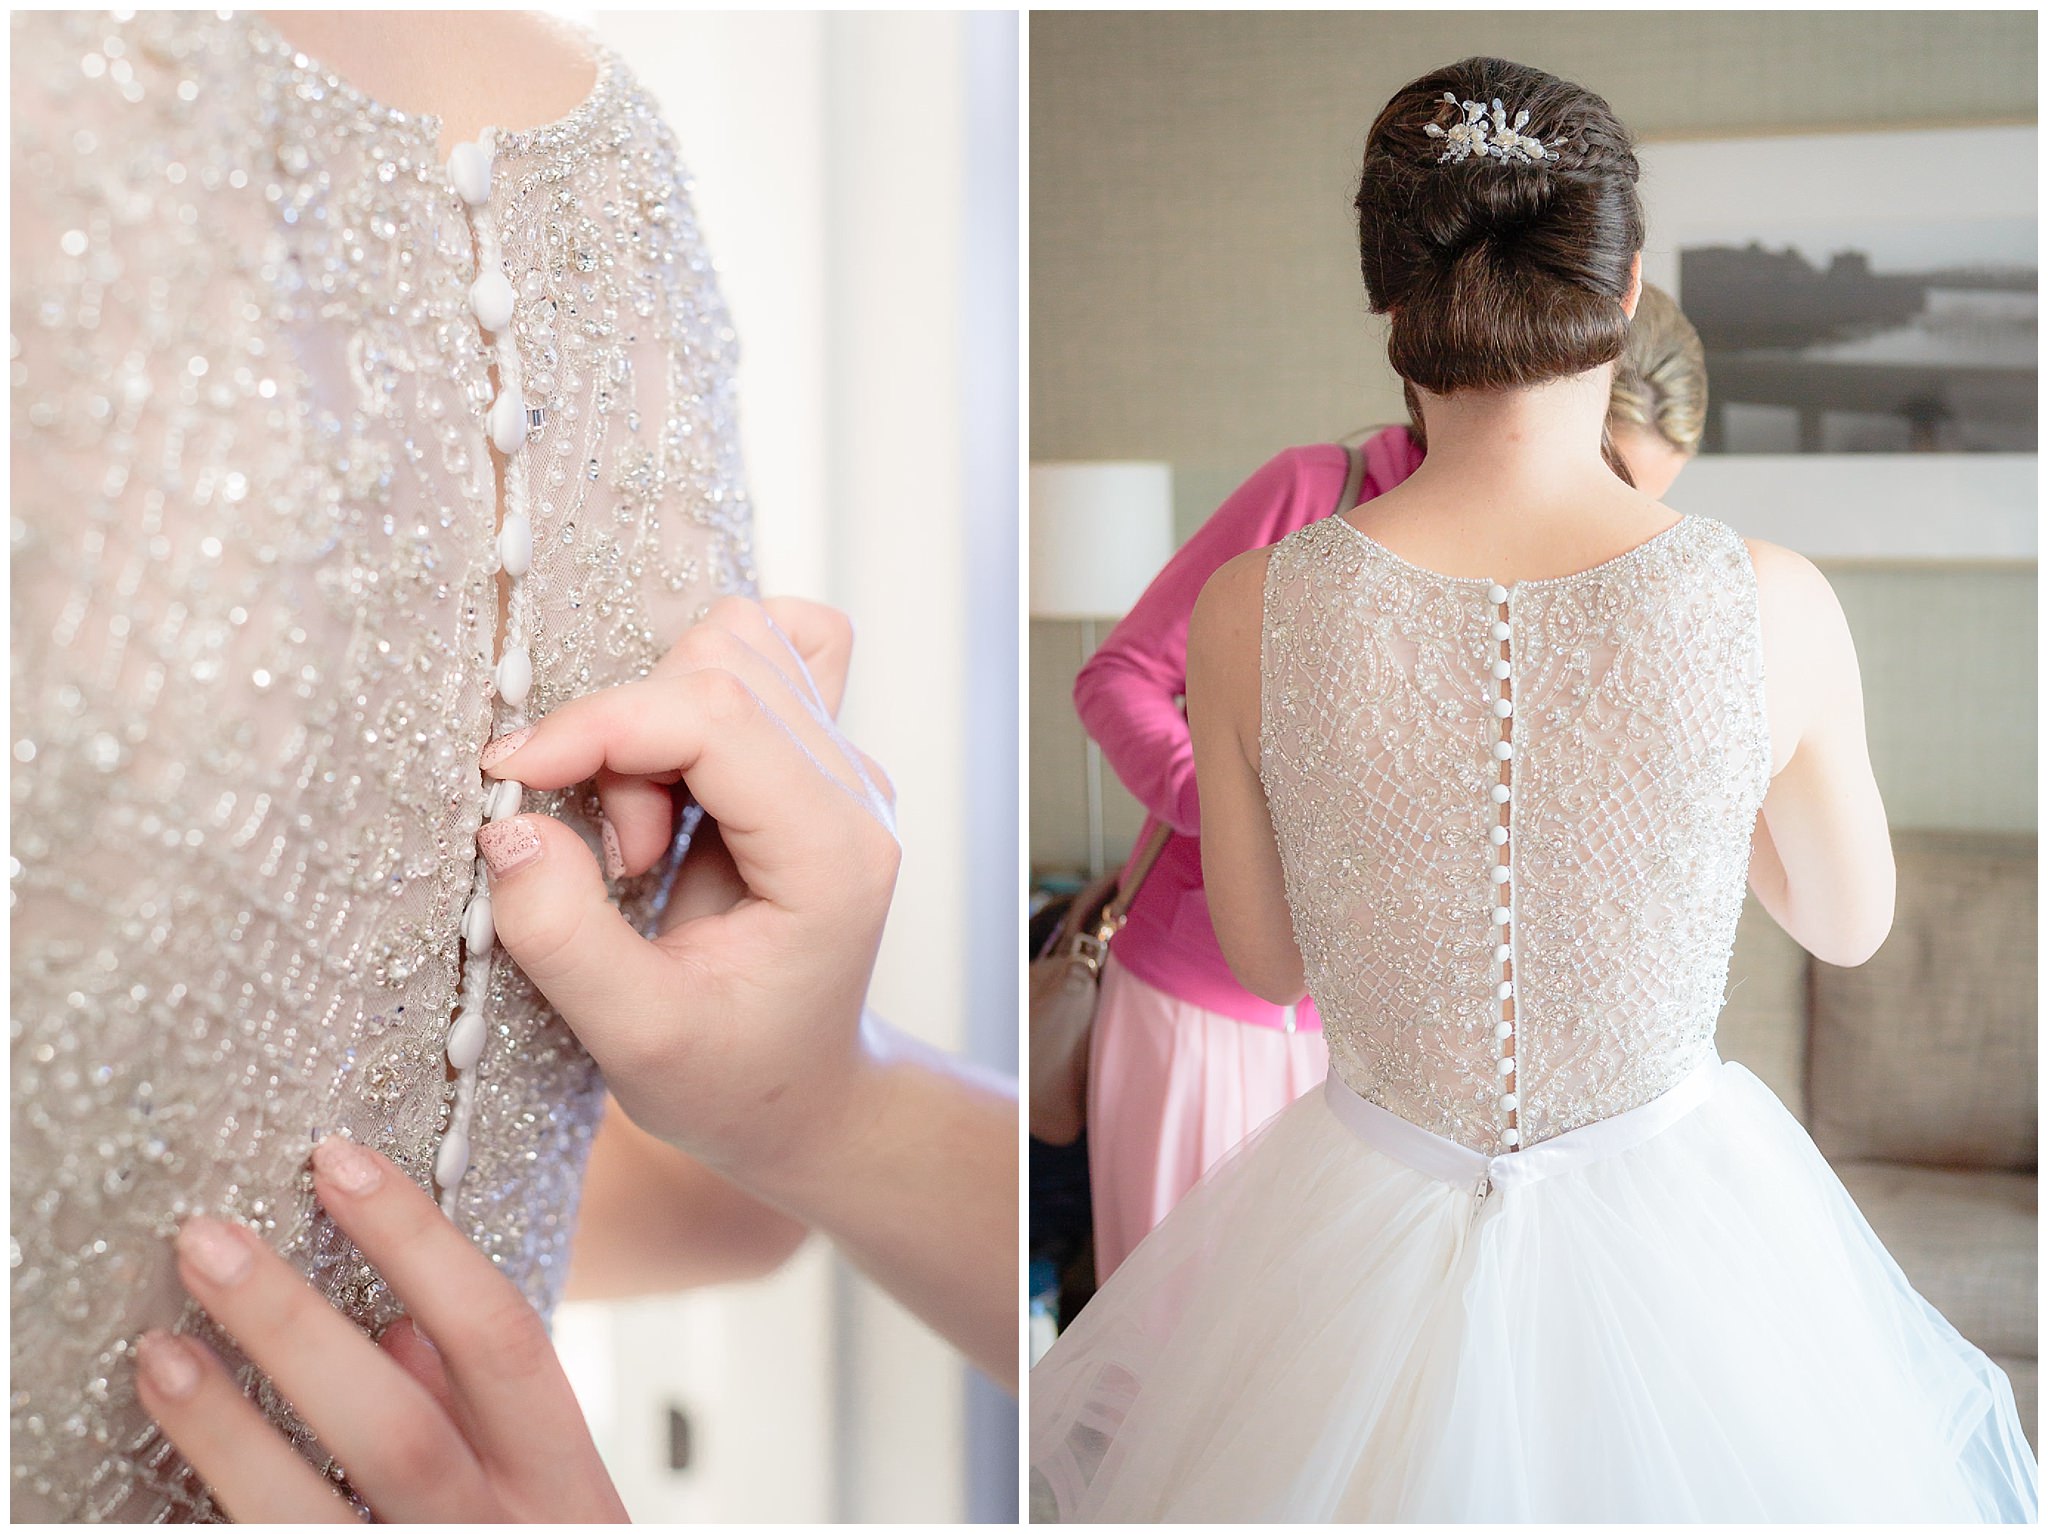 Buttons on the back of an Allure wedding dress